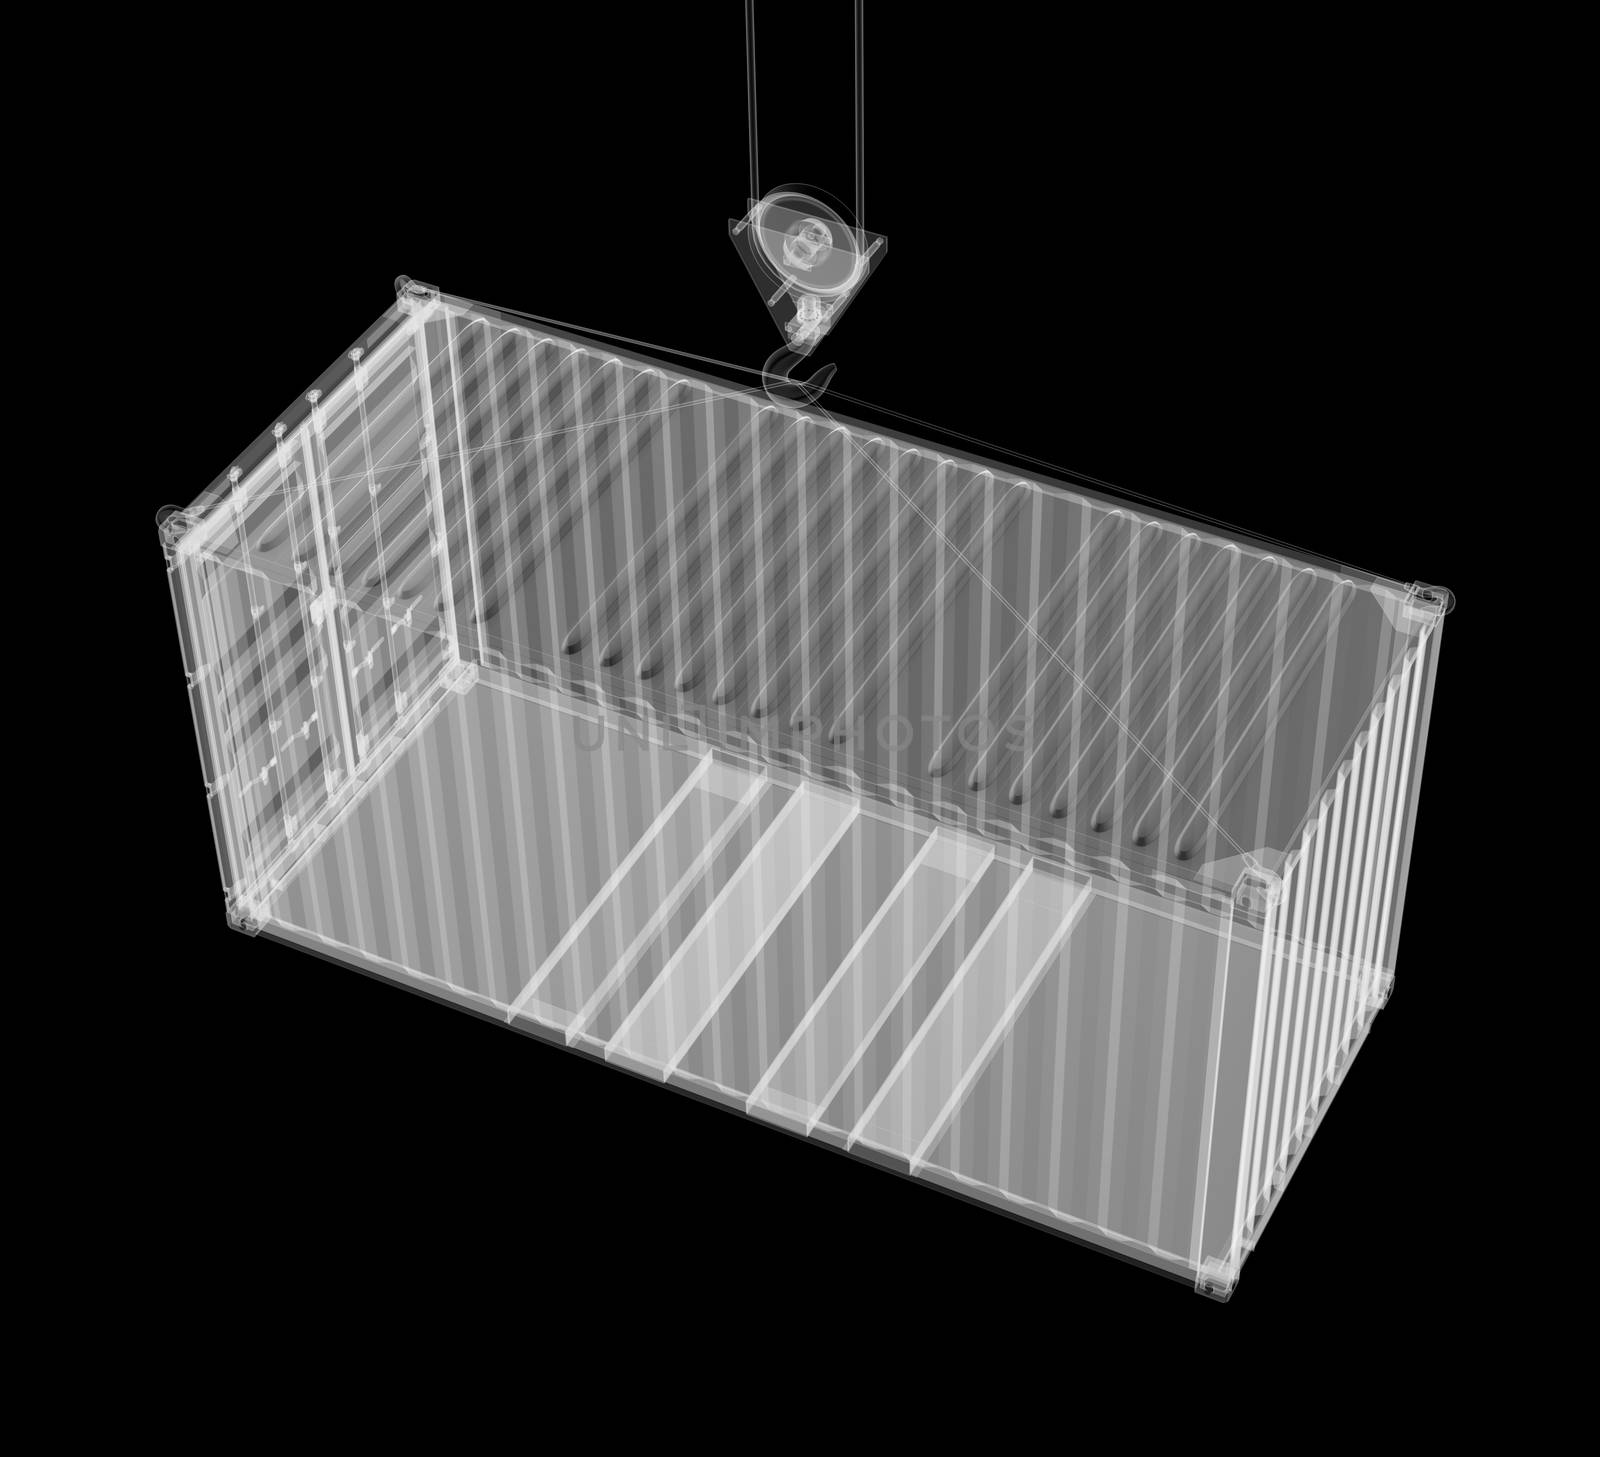 X-ray shipping container isolated on black. 3D rednering